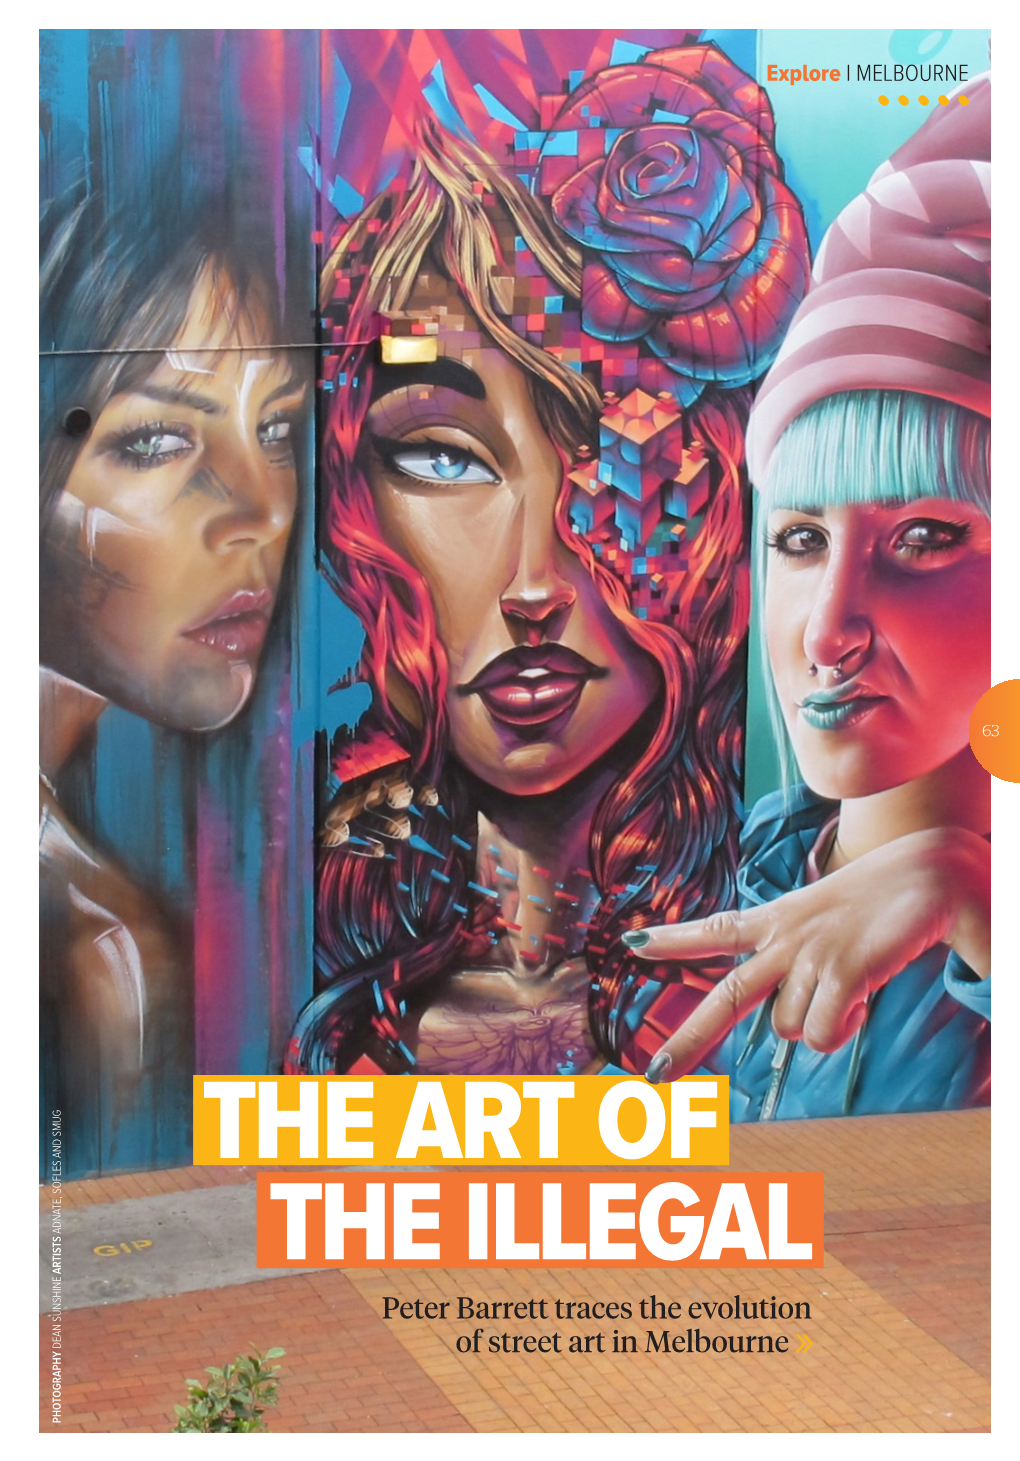 The Art of the Illegal